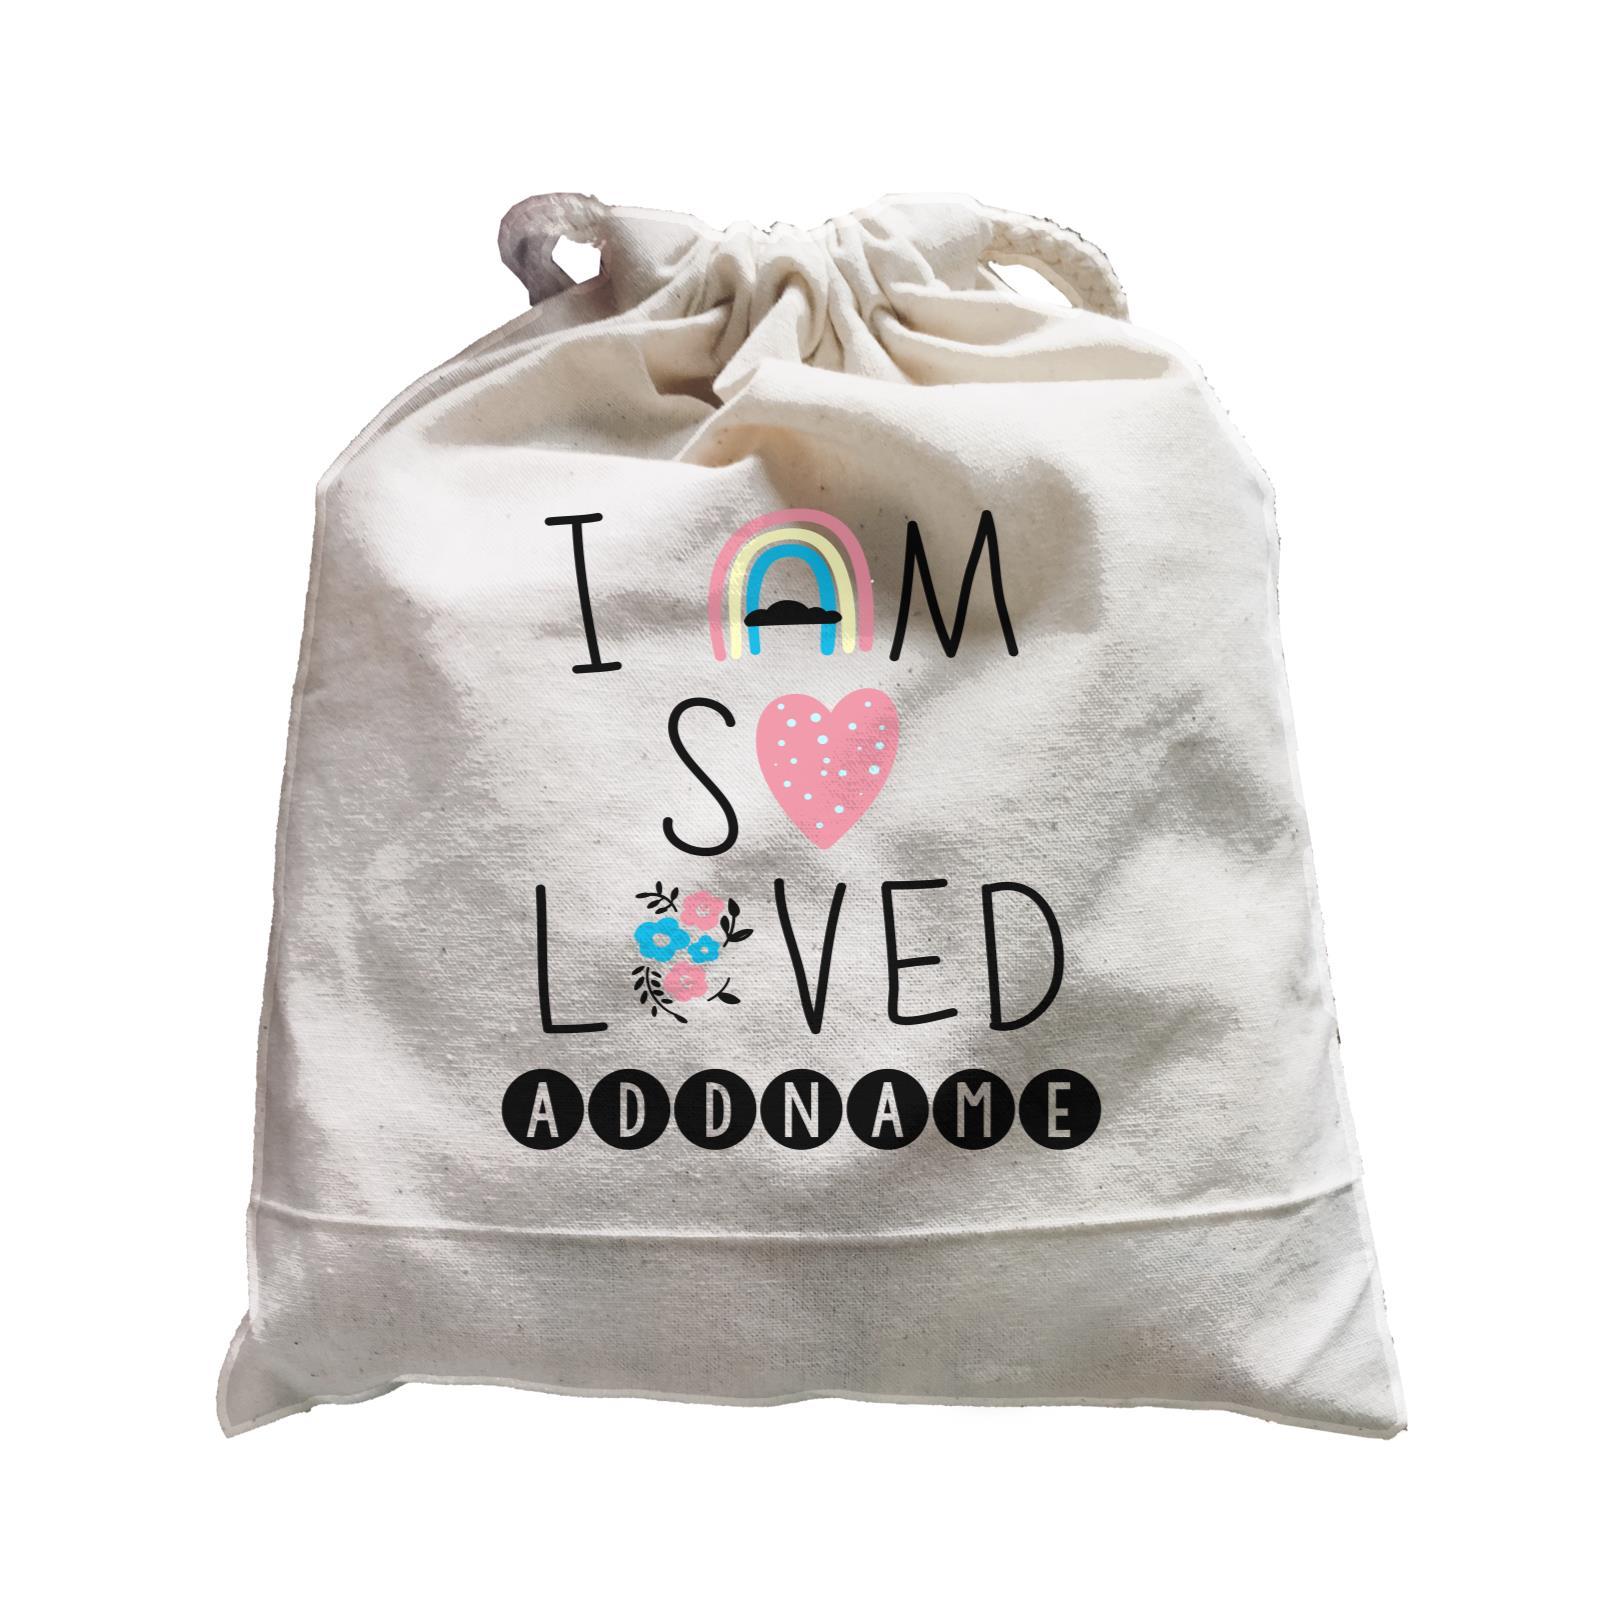 Children's Day Gift Series I Am So Loved Addname  Satchel